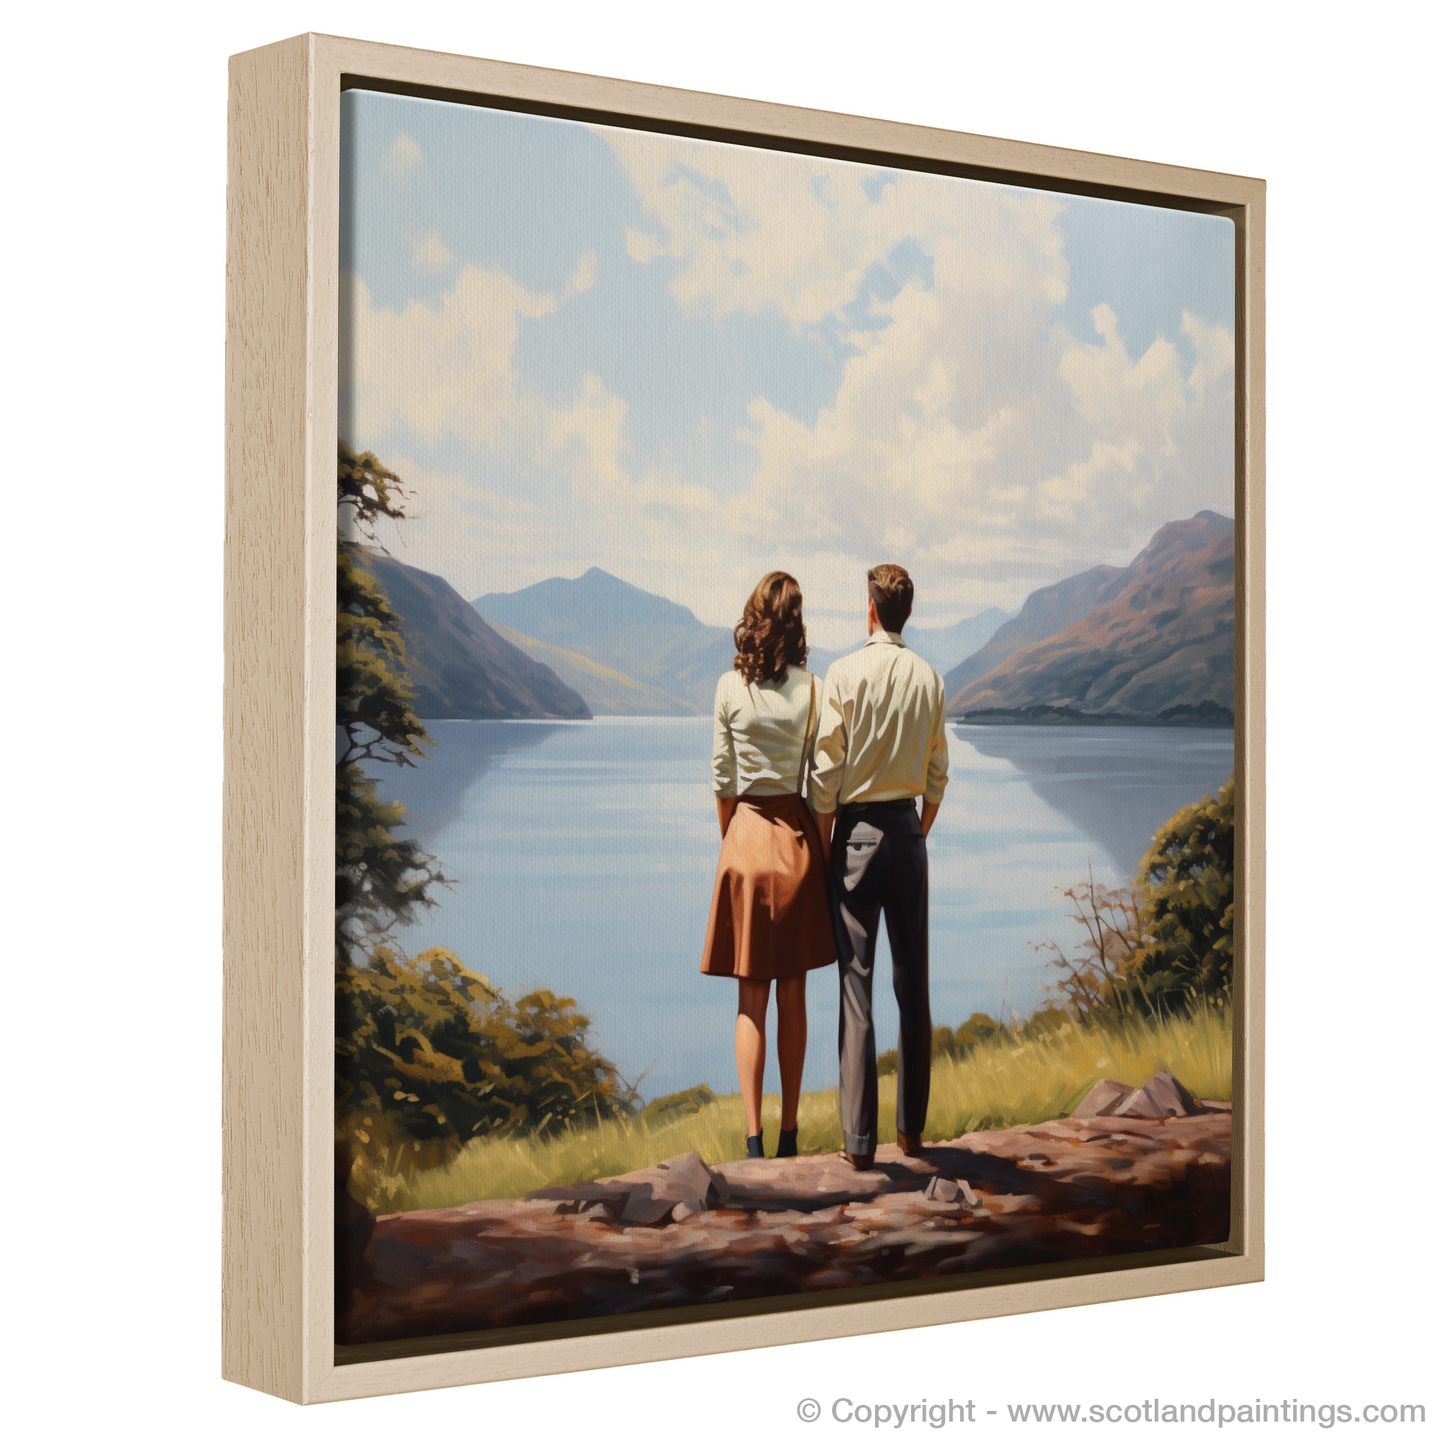 Painting and Art Print of A couple holding hands looking out on Loch Lomond entitled "Hand in Hand at Loch Lomond".